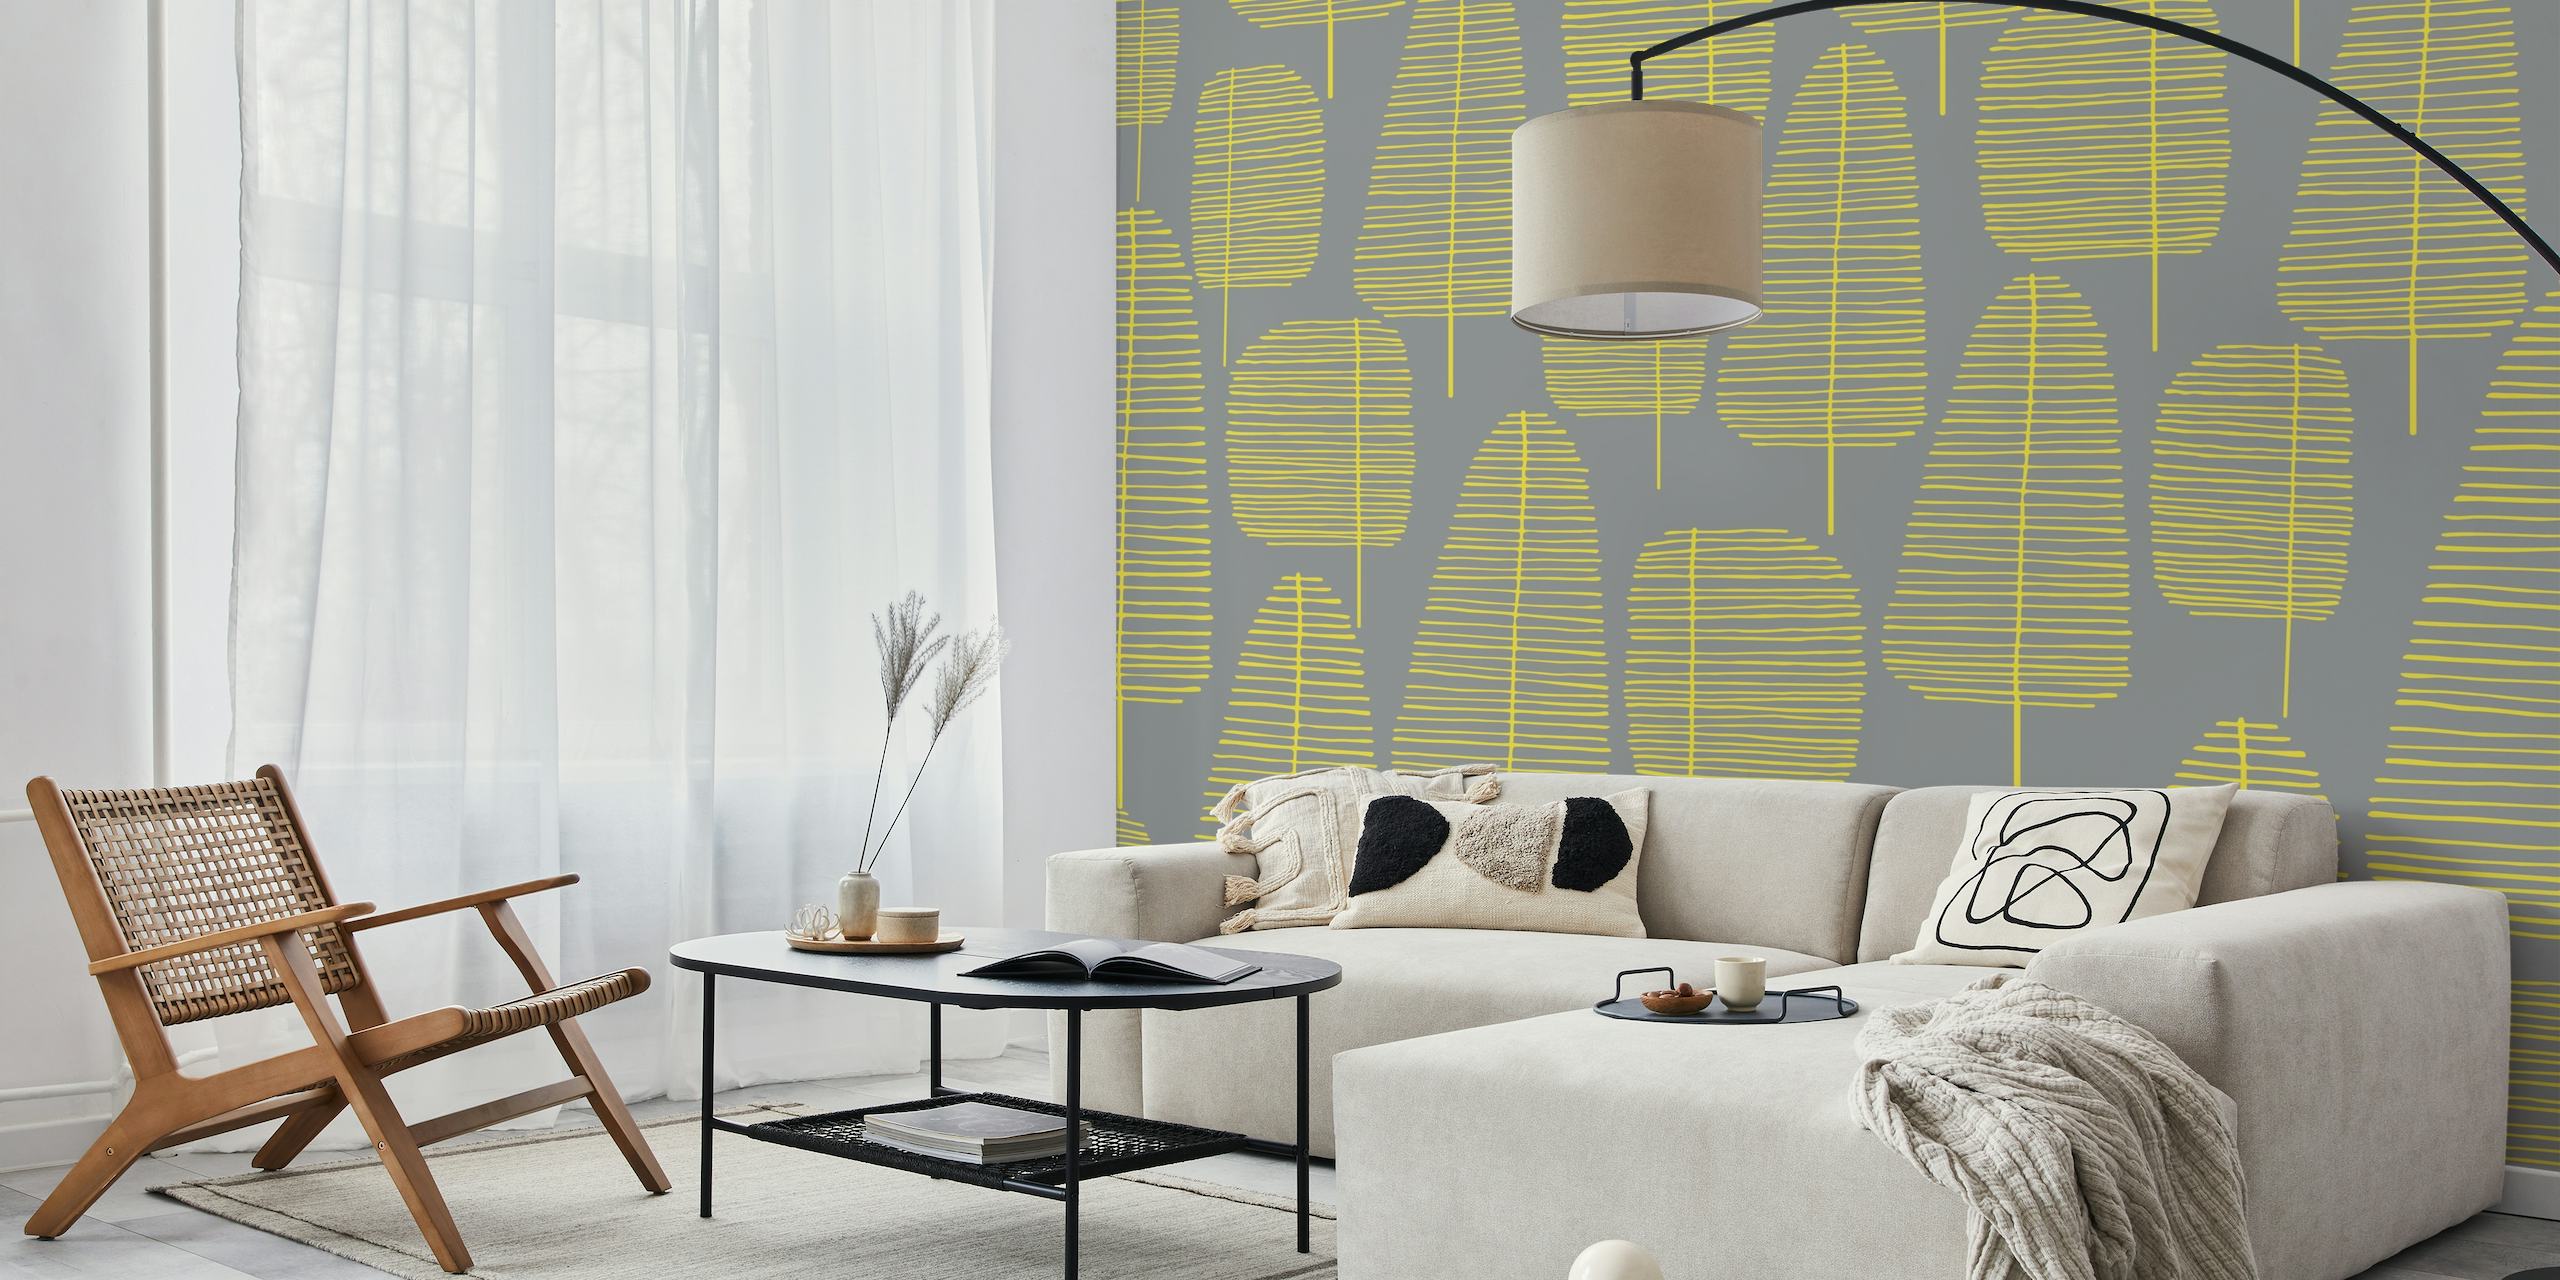 Mid-century modern style forest wall mural with stylized trees and geometric patterns